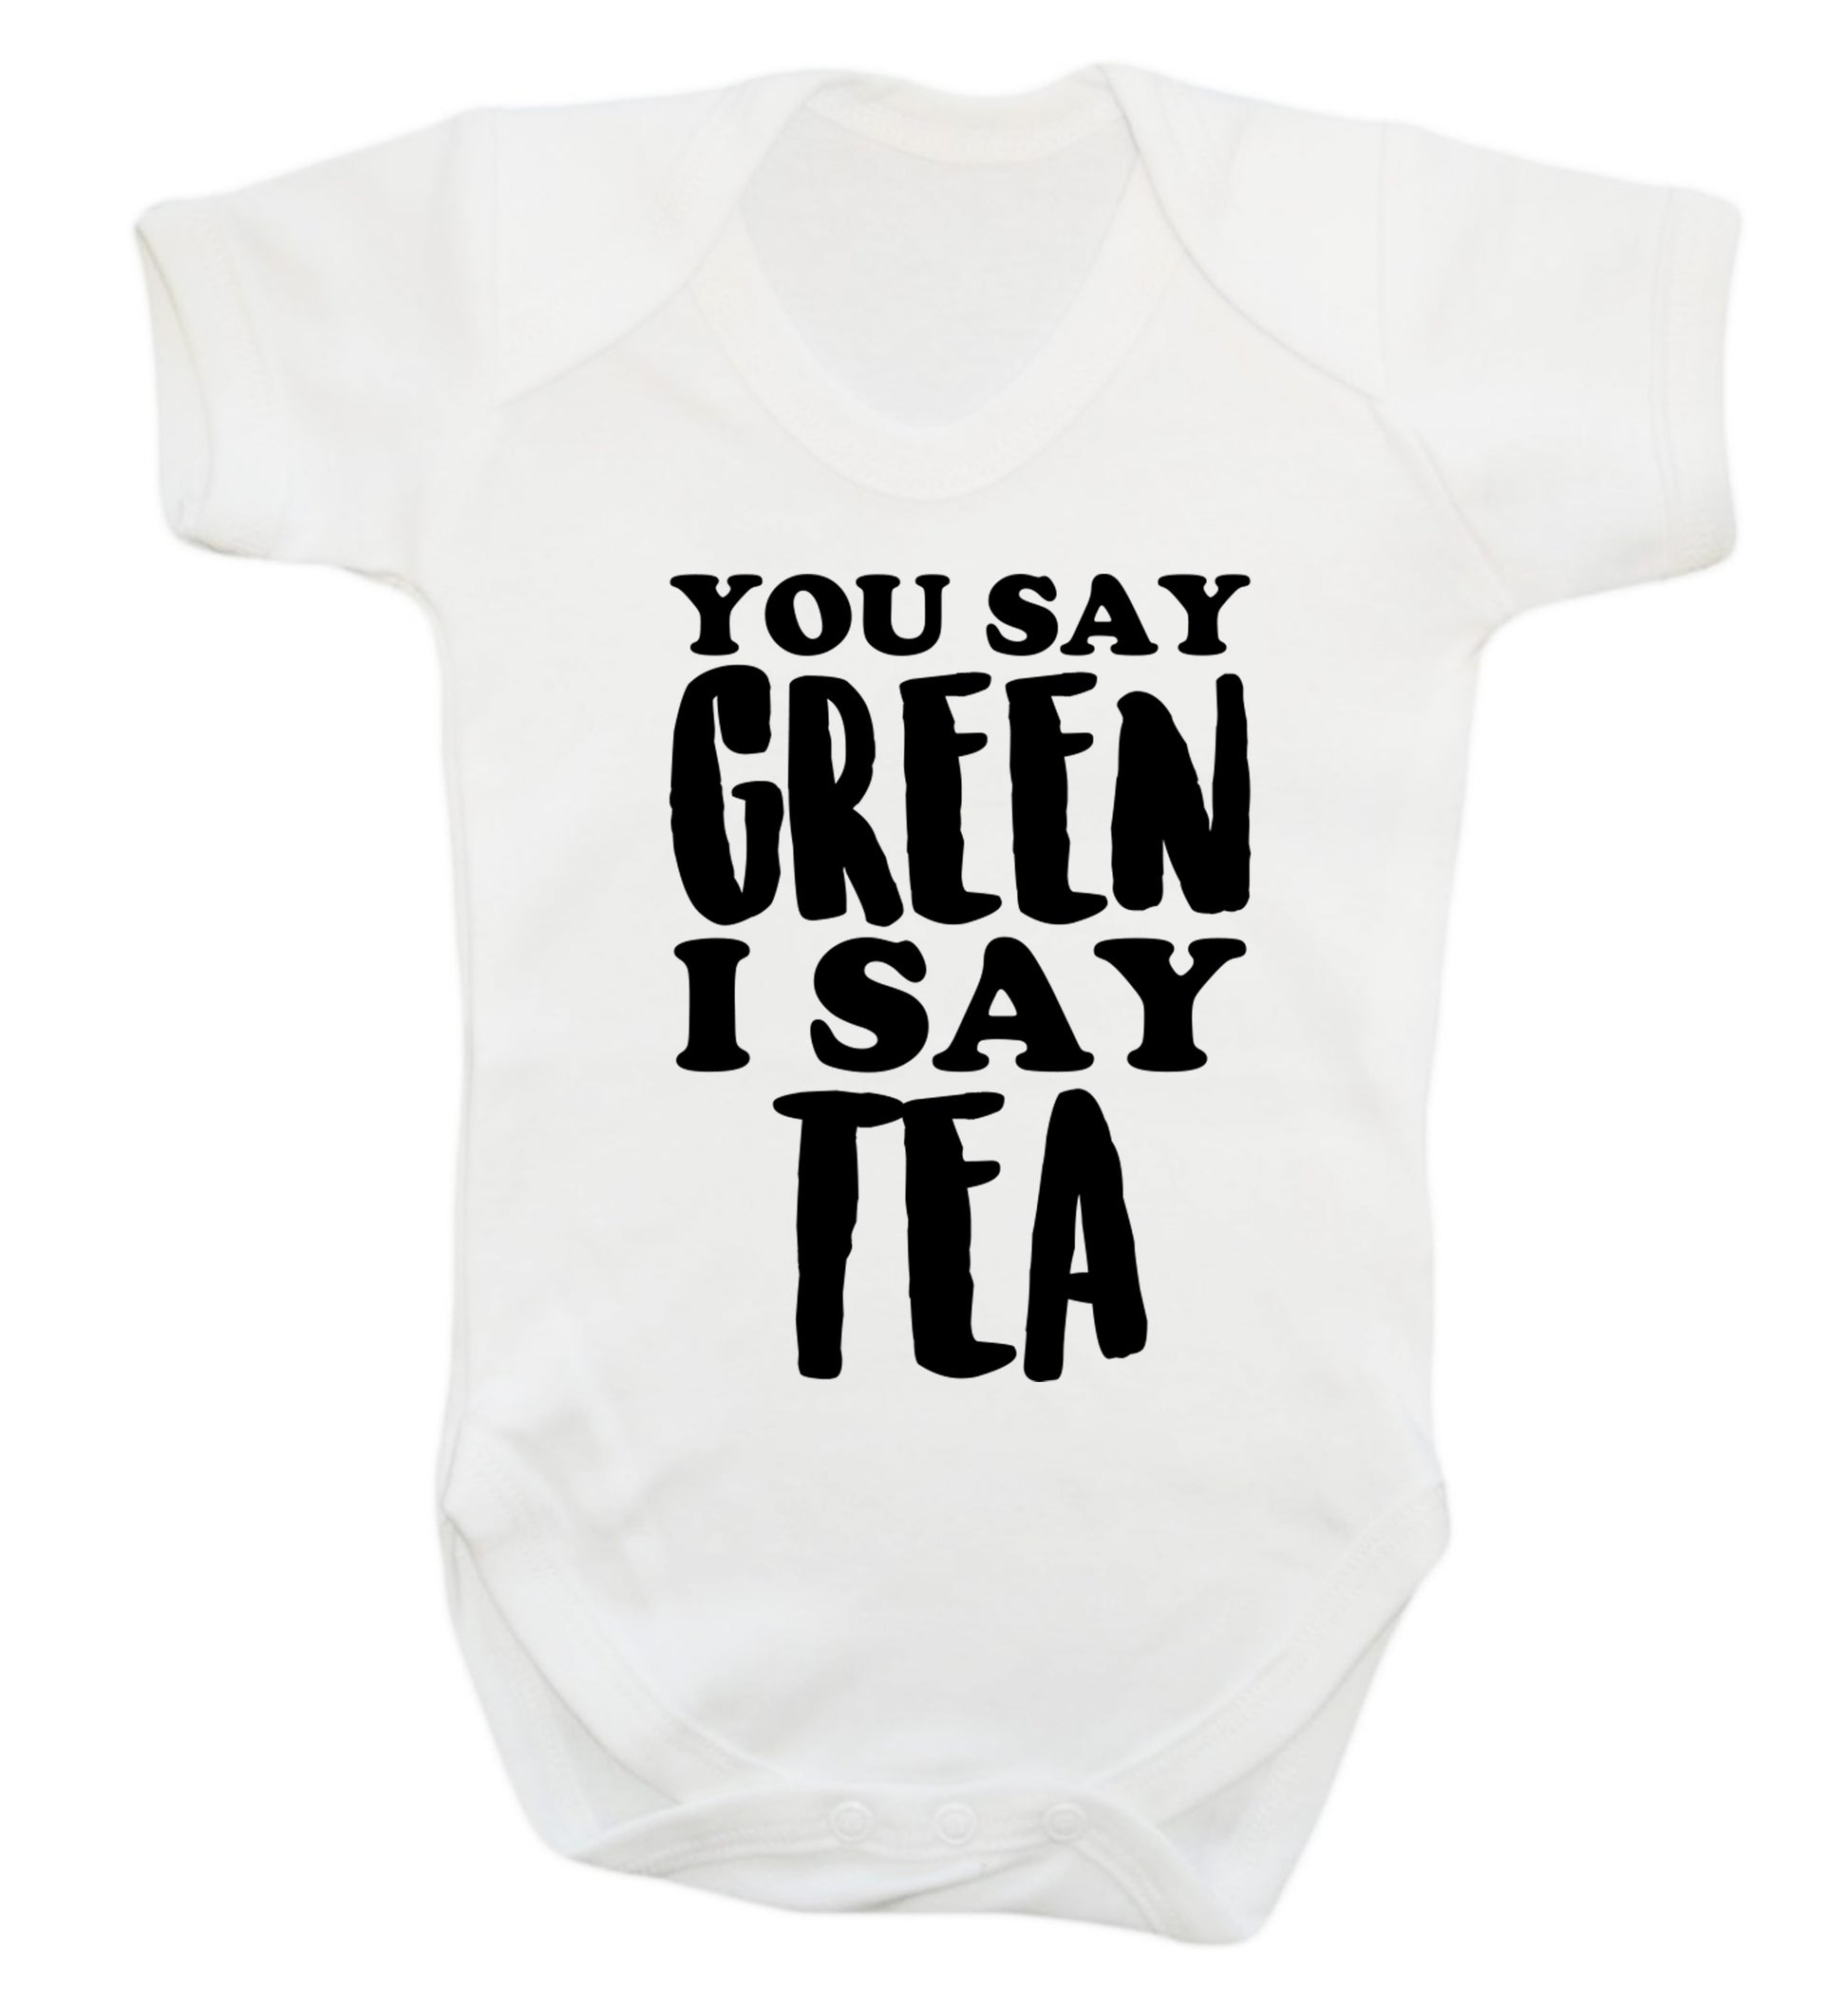 You say green I say tea! Baby Vest white 18-24 months